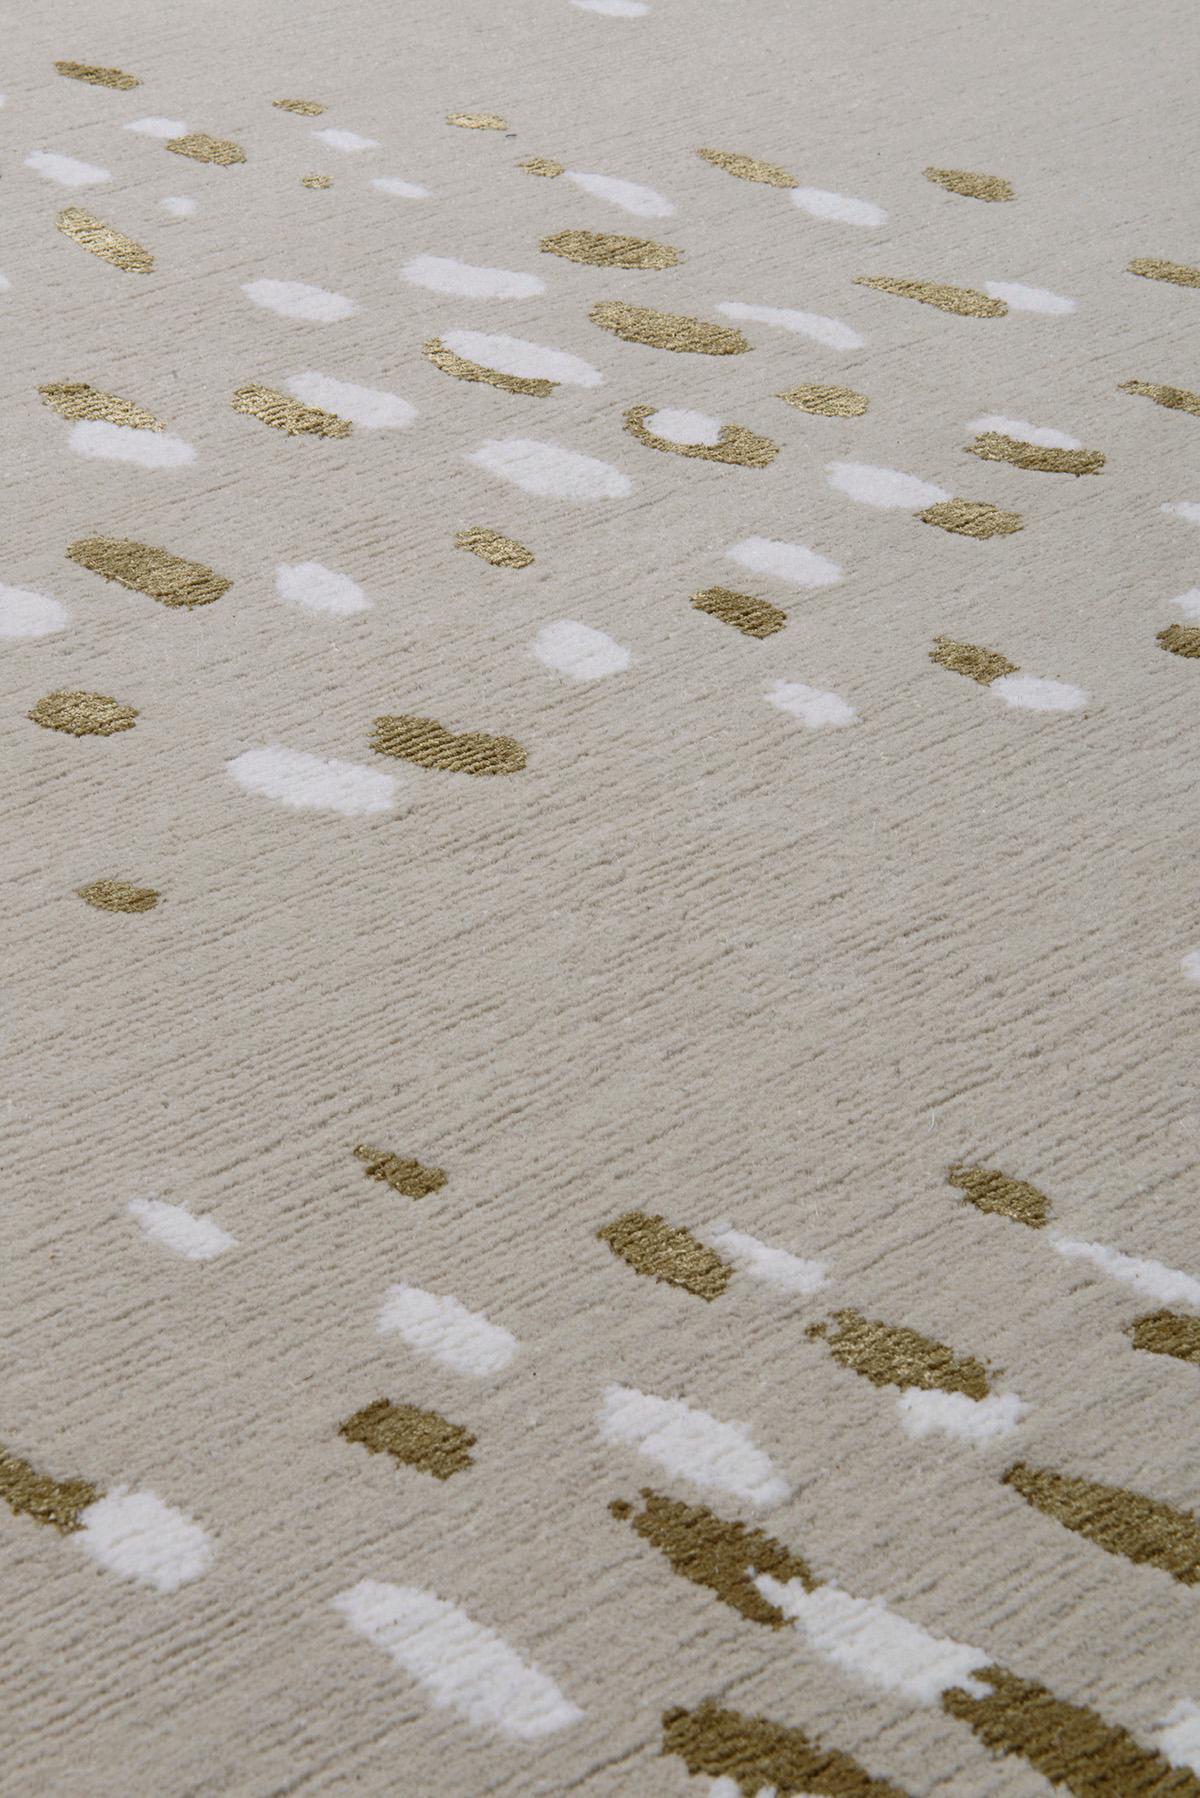 With a nod to the natural world, Fleck rug is reminiscent of a flock of birds in flight. The arrangement of freckles weave and swerve in union across the face of this design as they expand into abstract shapes. Crafted on a neutral wool background,